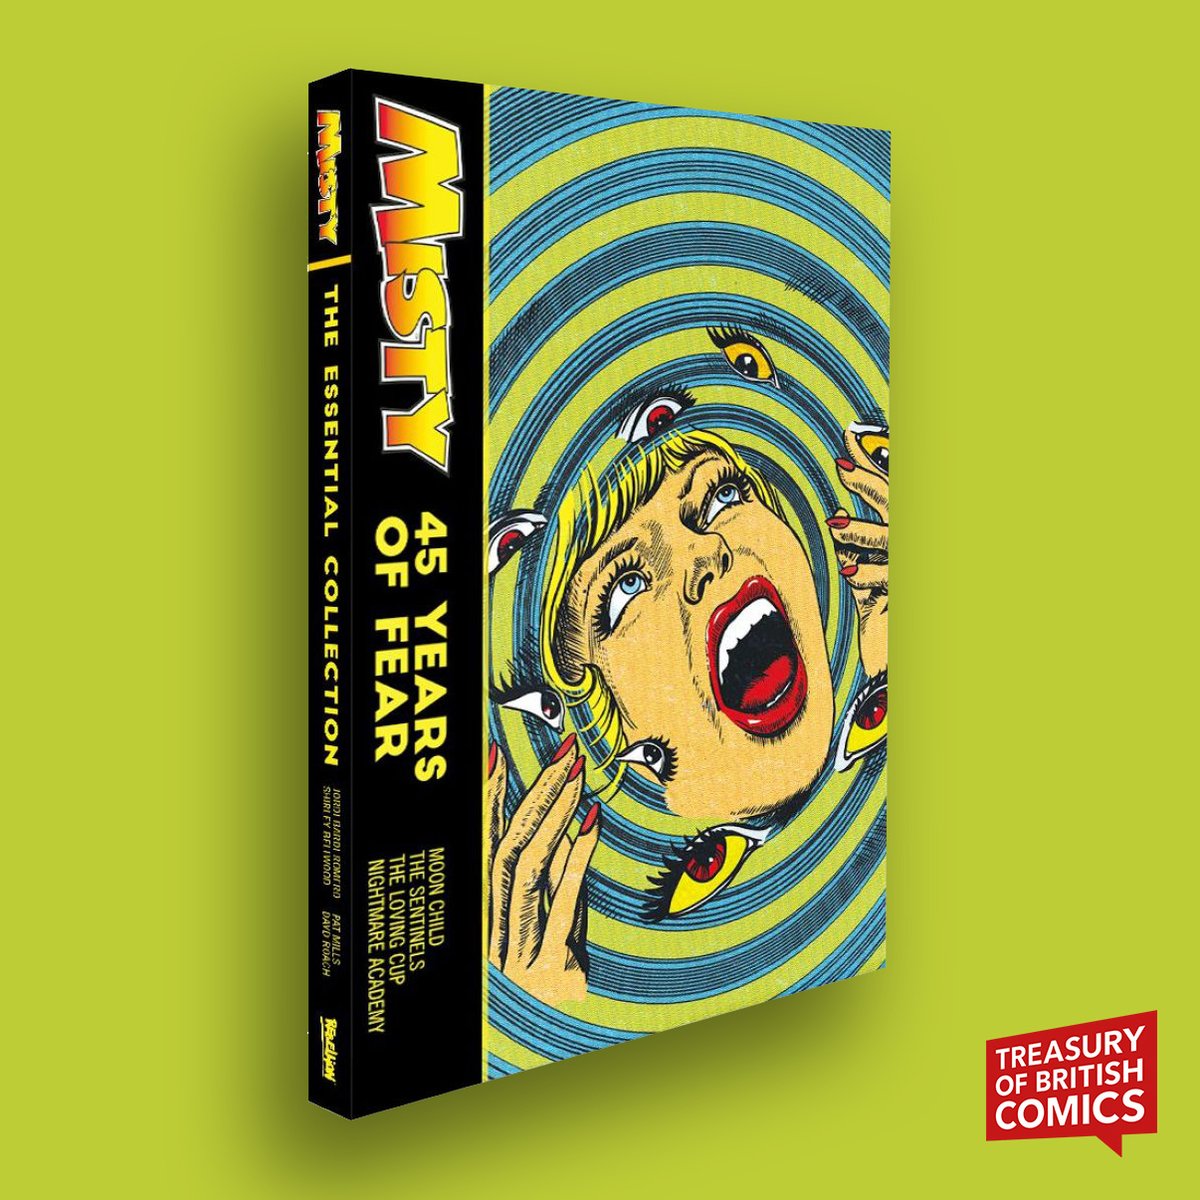 It's the cult horror comic for girls that helped change comics forever – this beautiful tome curates the creepiest, campest stories from 'Misty' in a volume perfect for readers old and new bit.ly/3td1mif